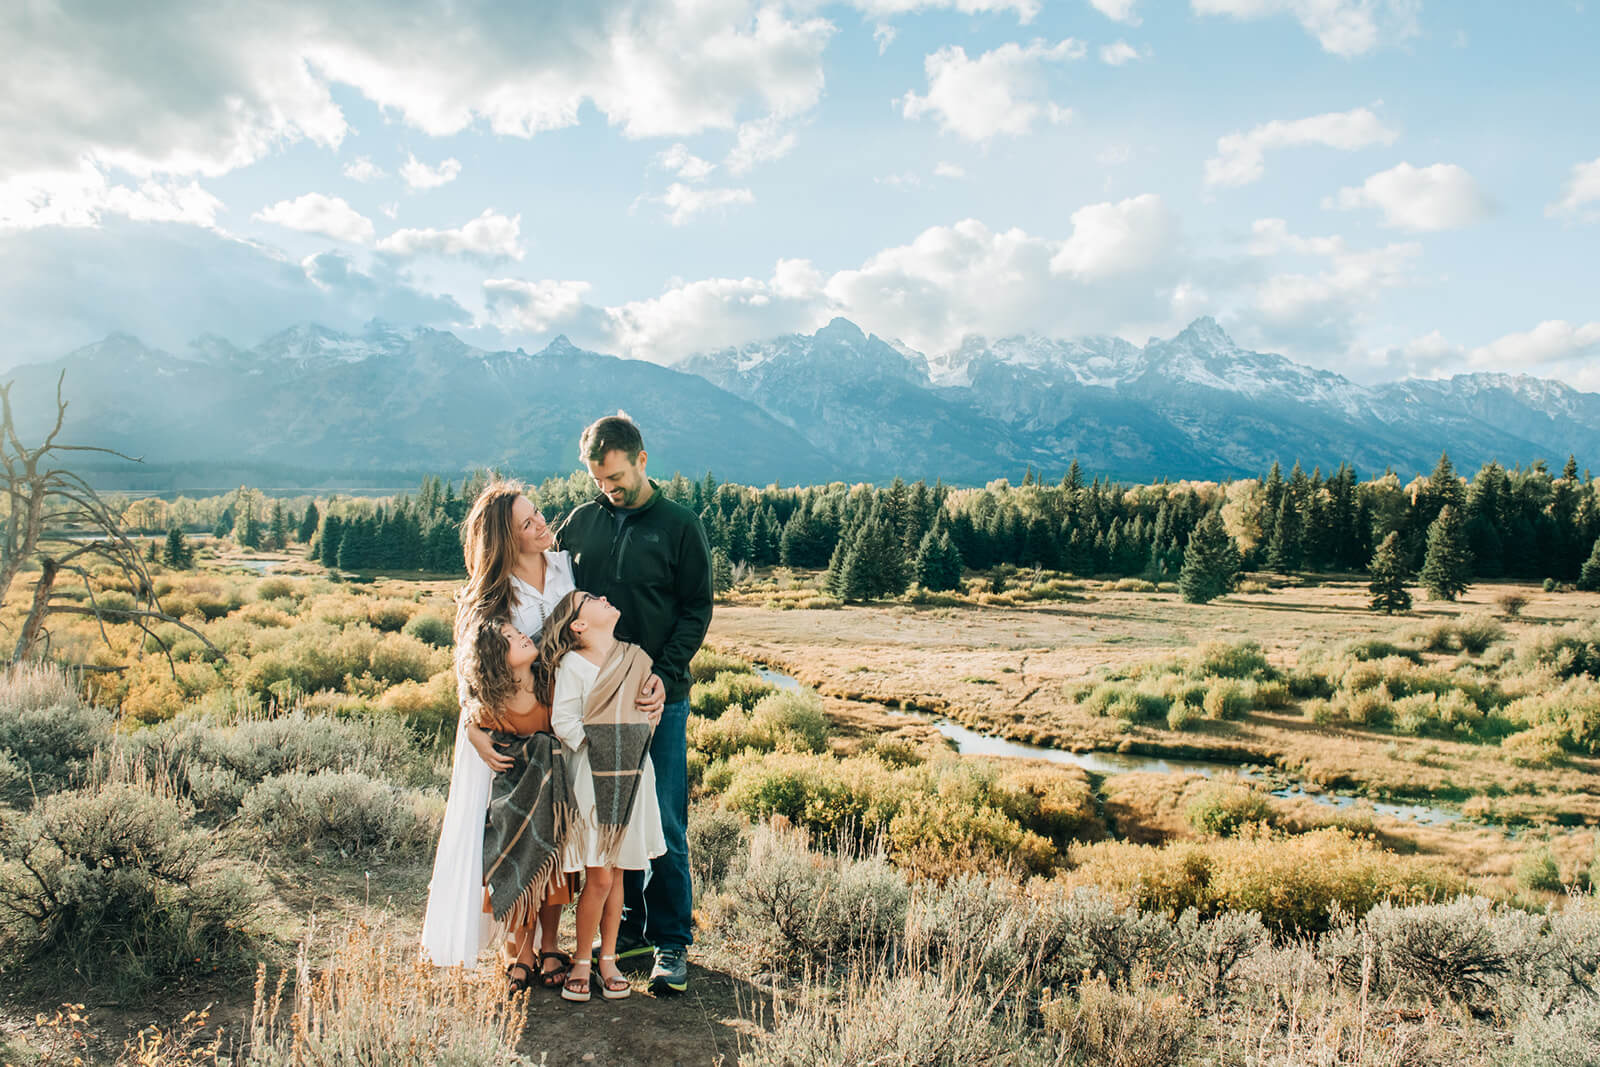 Family Portrait in Meadow with Mountains